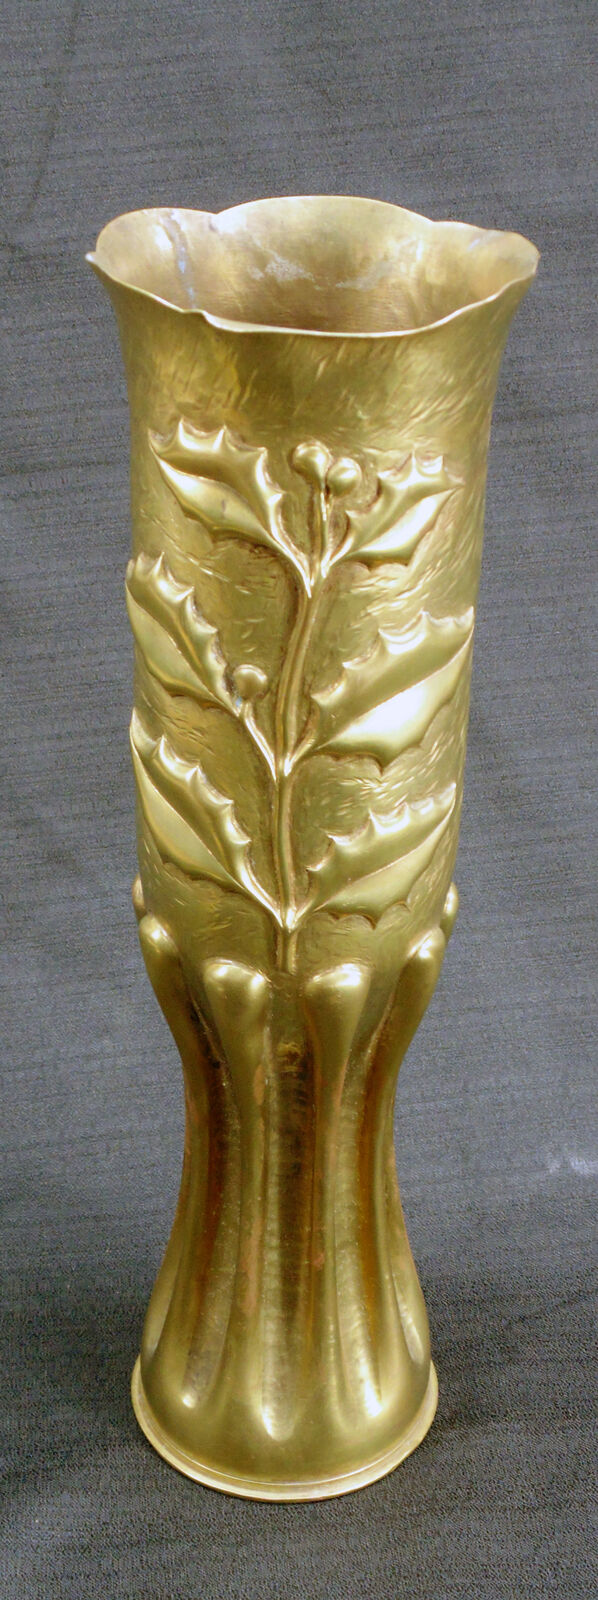 Vintage WWI WWII 75mm Military Brass Trench Fluted Art Vase Ornate Rare